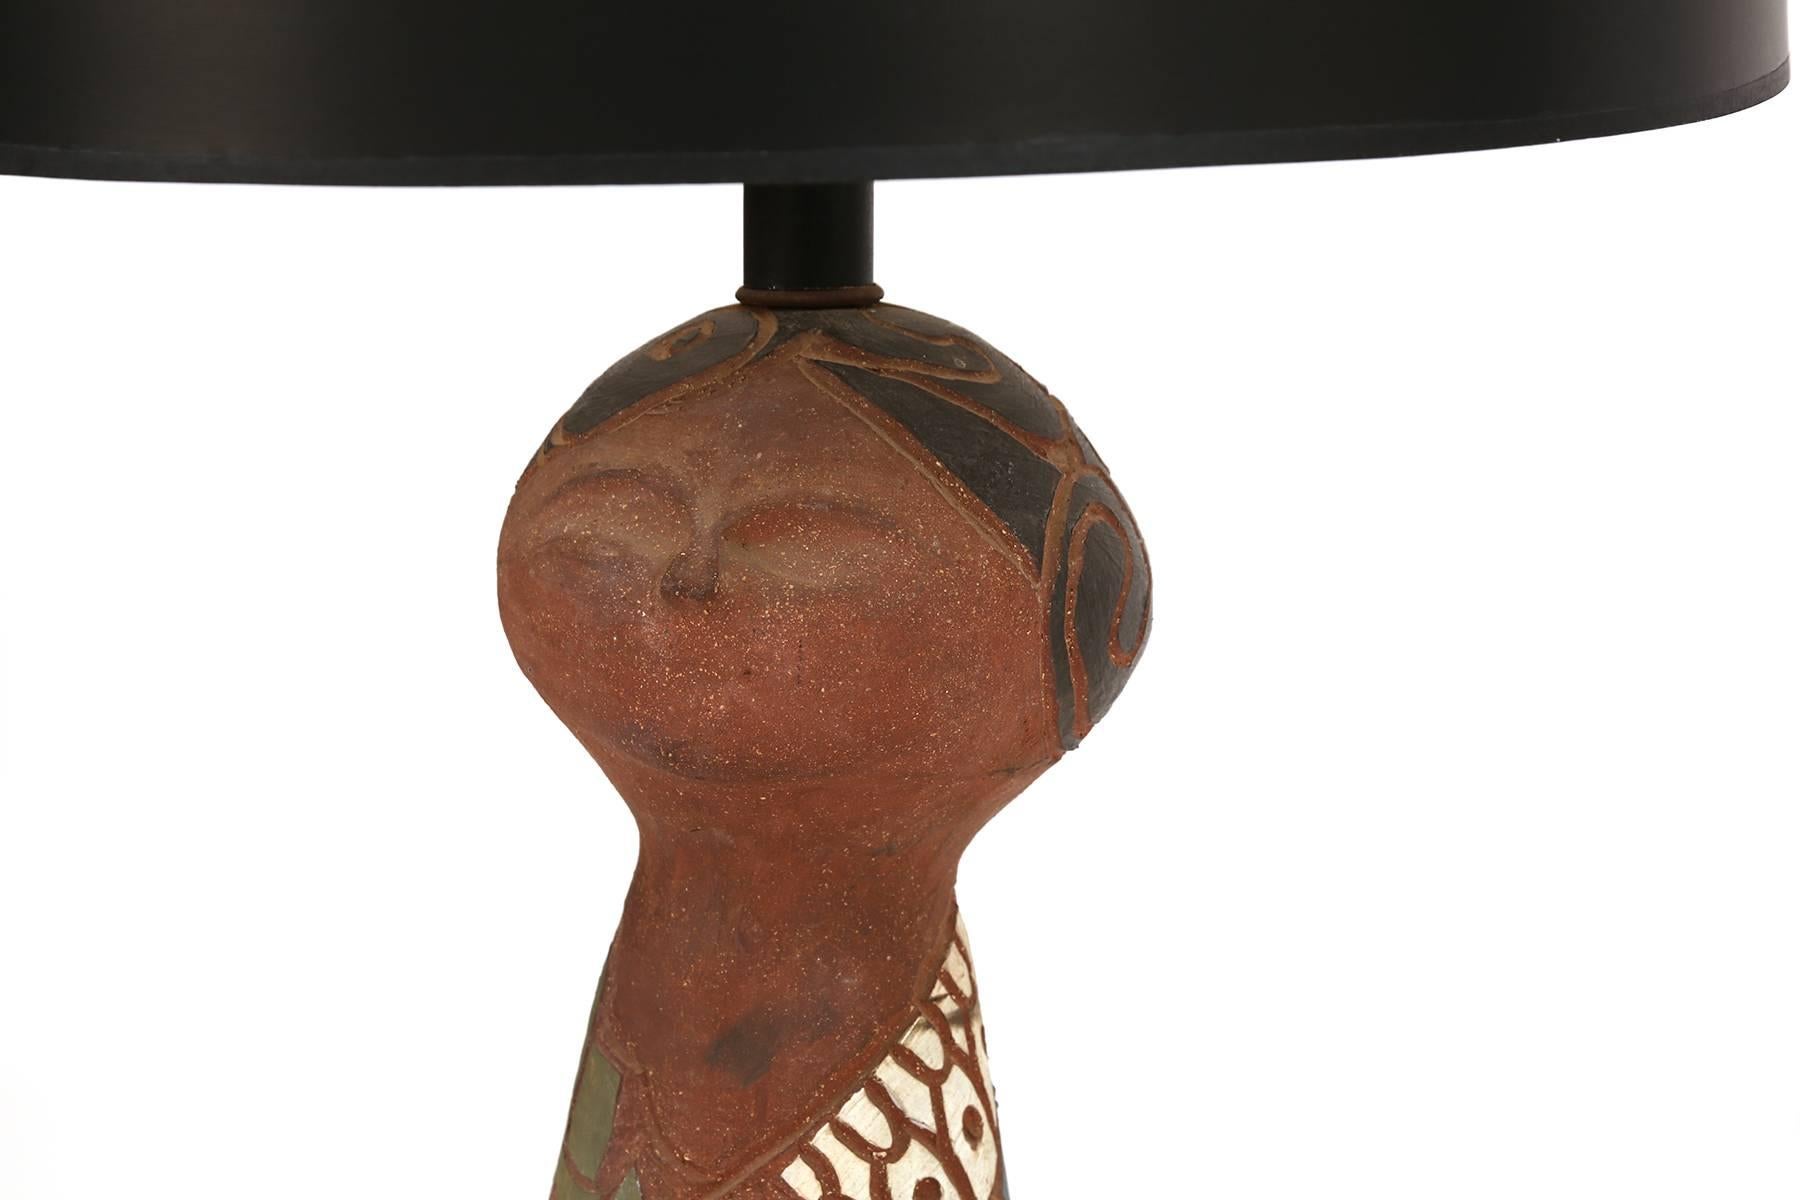 California studio large-scale terra cotta lamp, circa early 1960s. This example reminiscent of the works of Raul Coronel and Brent Bennett is hand-carved and glazed and sits atop a walnut base. Priced without the shade. Red can procure a shade for